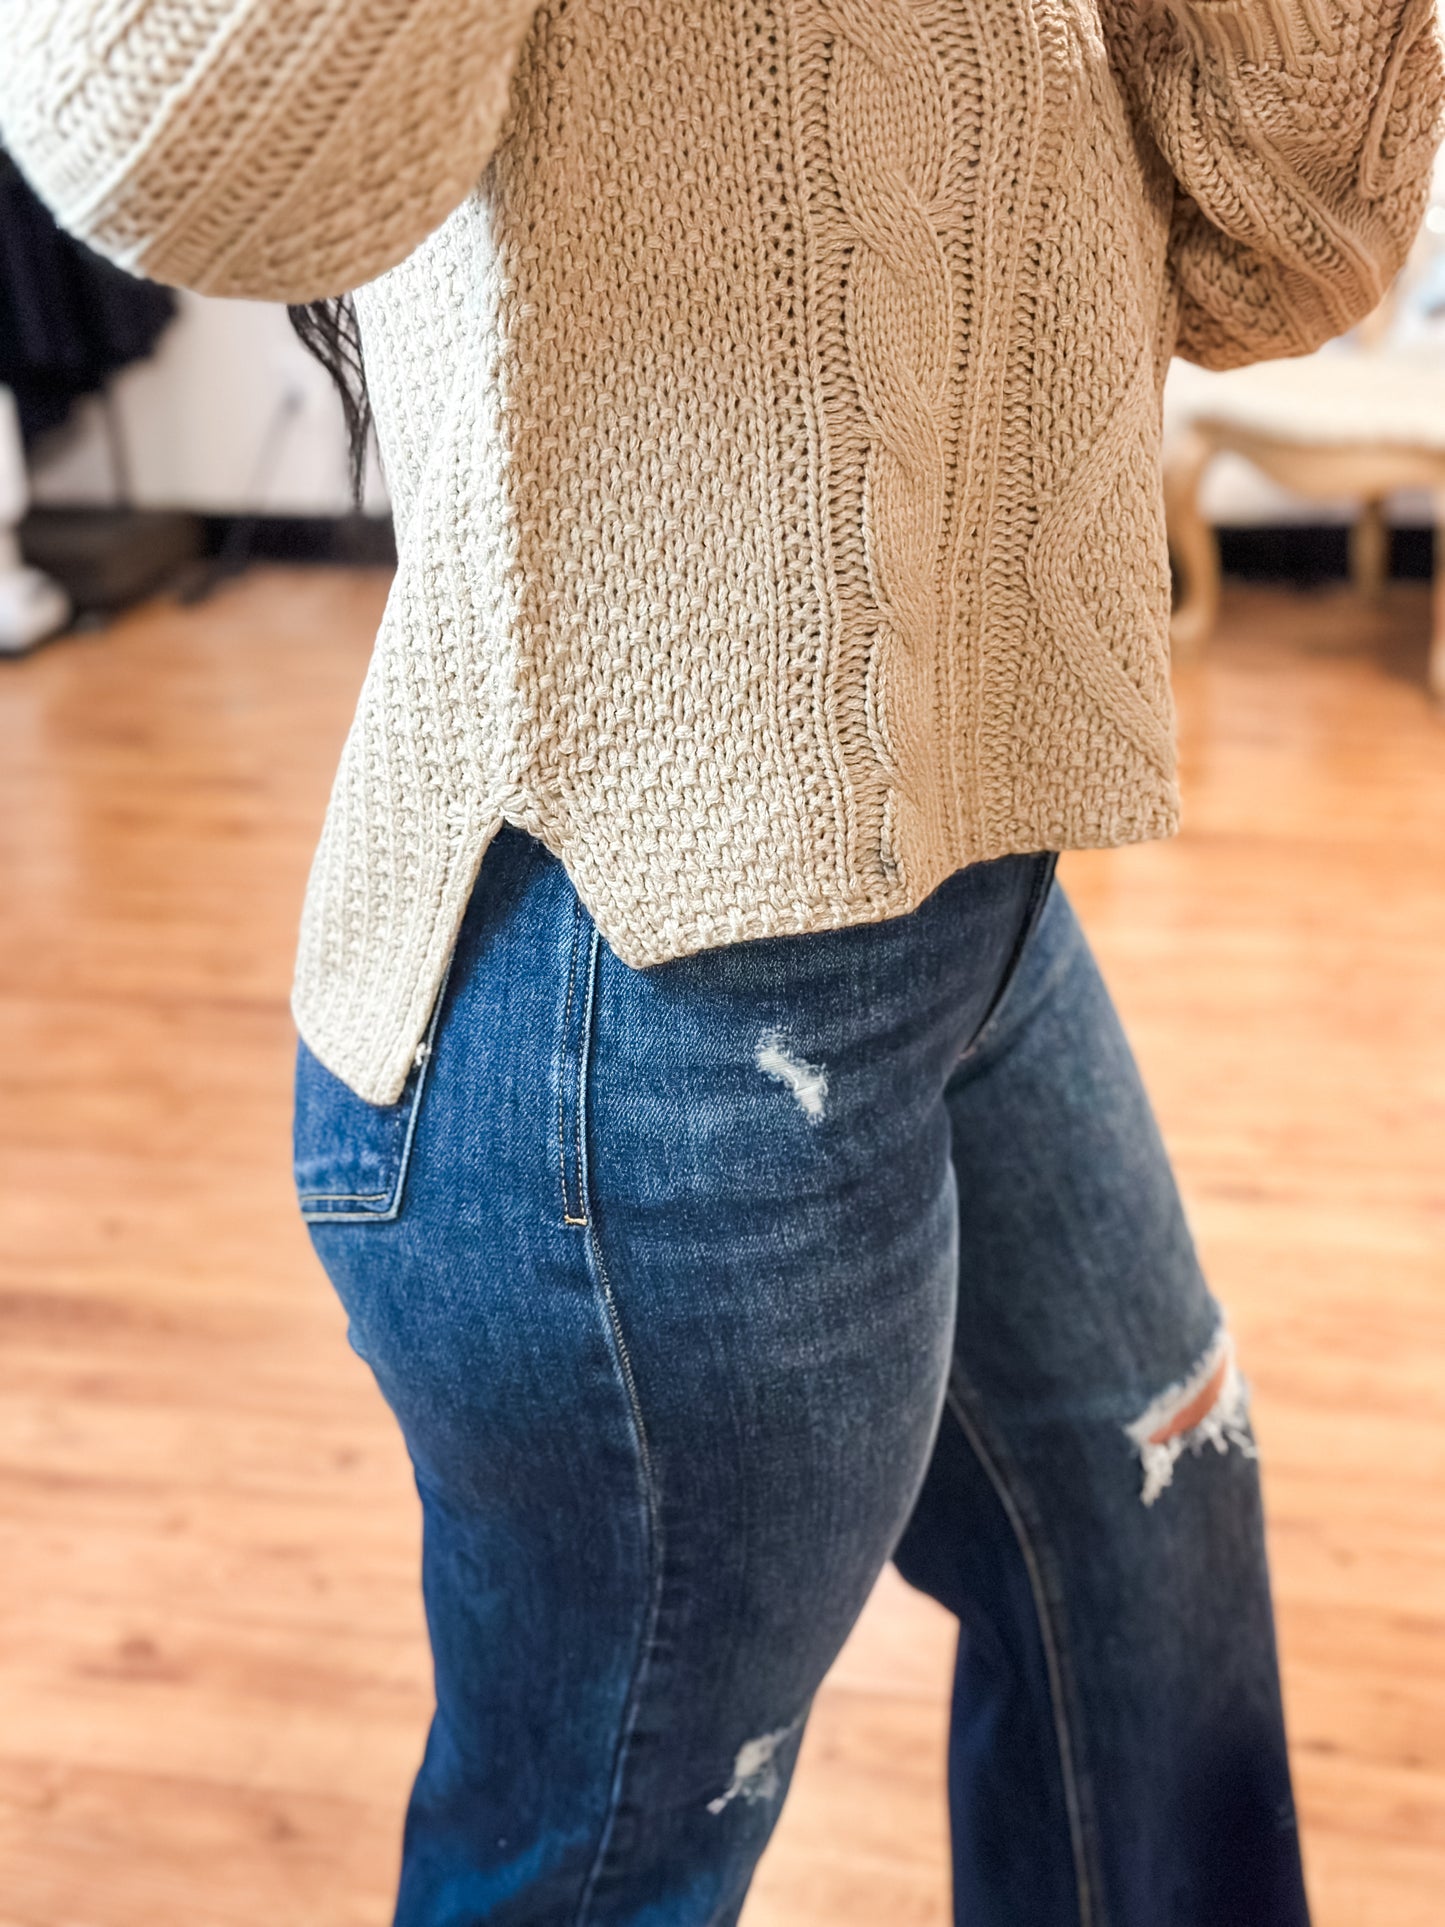 Classic Cable Knit Sweater